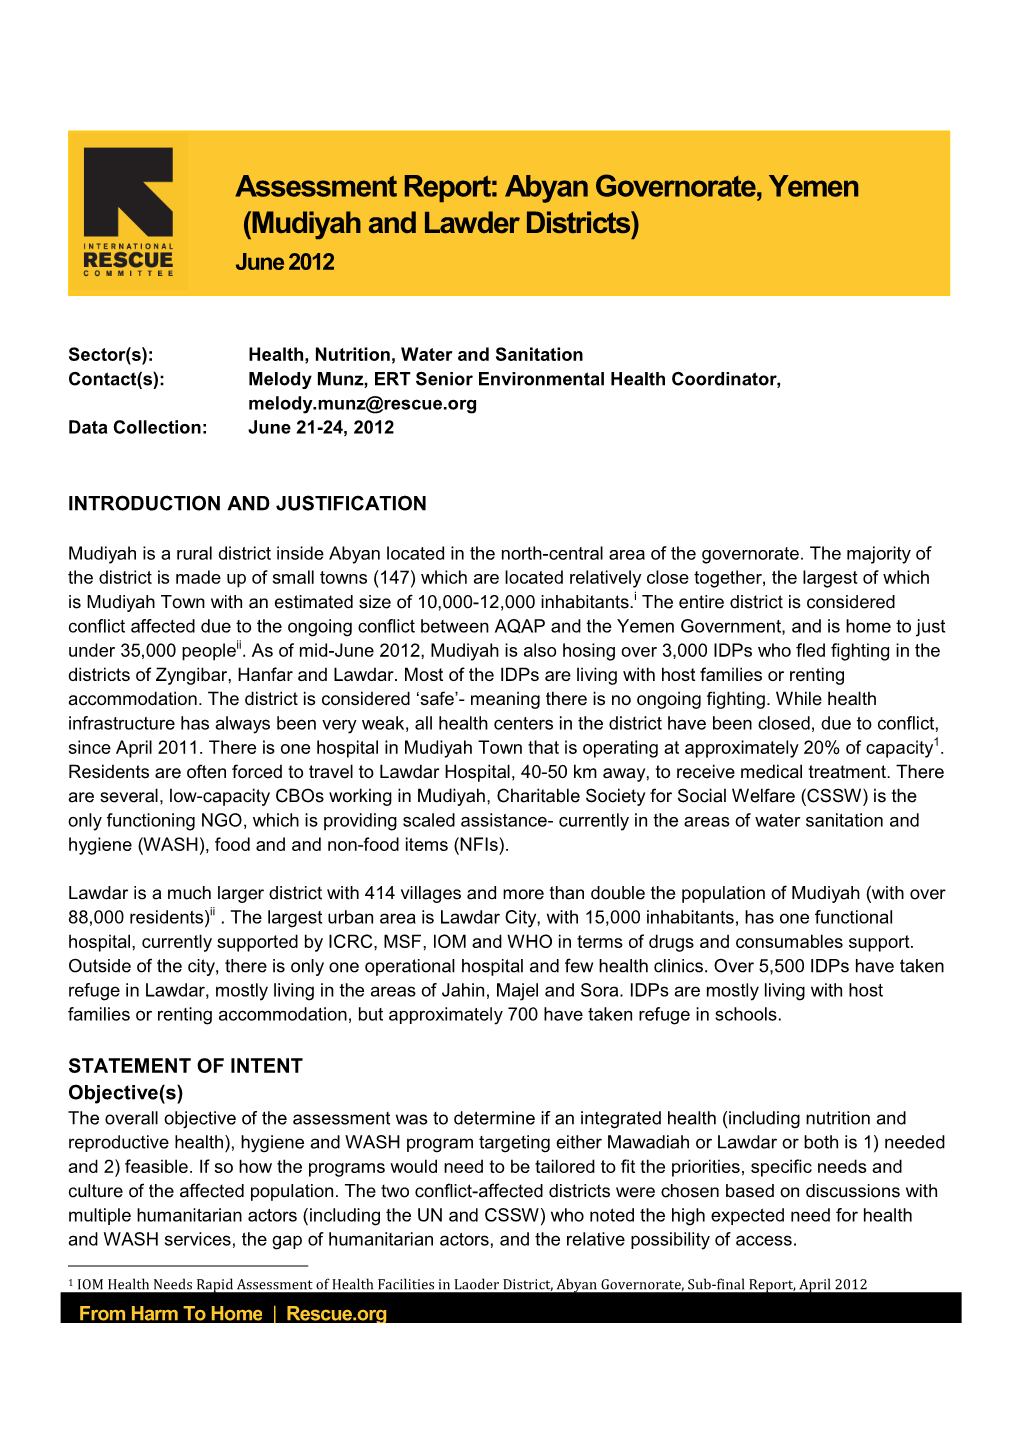 Assessment Report: Abyan Governorate, Yemen (Mudiyah and Lawder Districts) June 2012